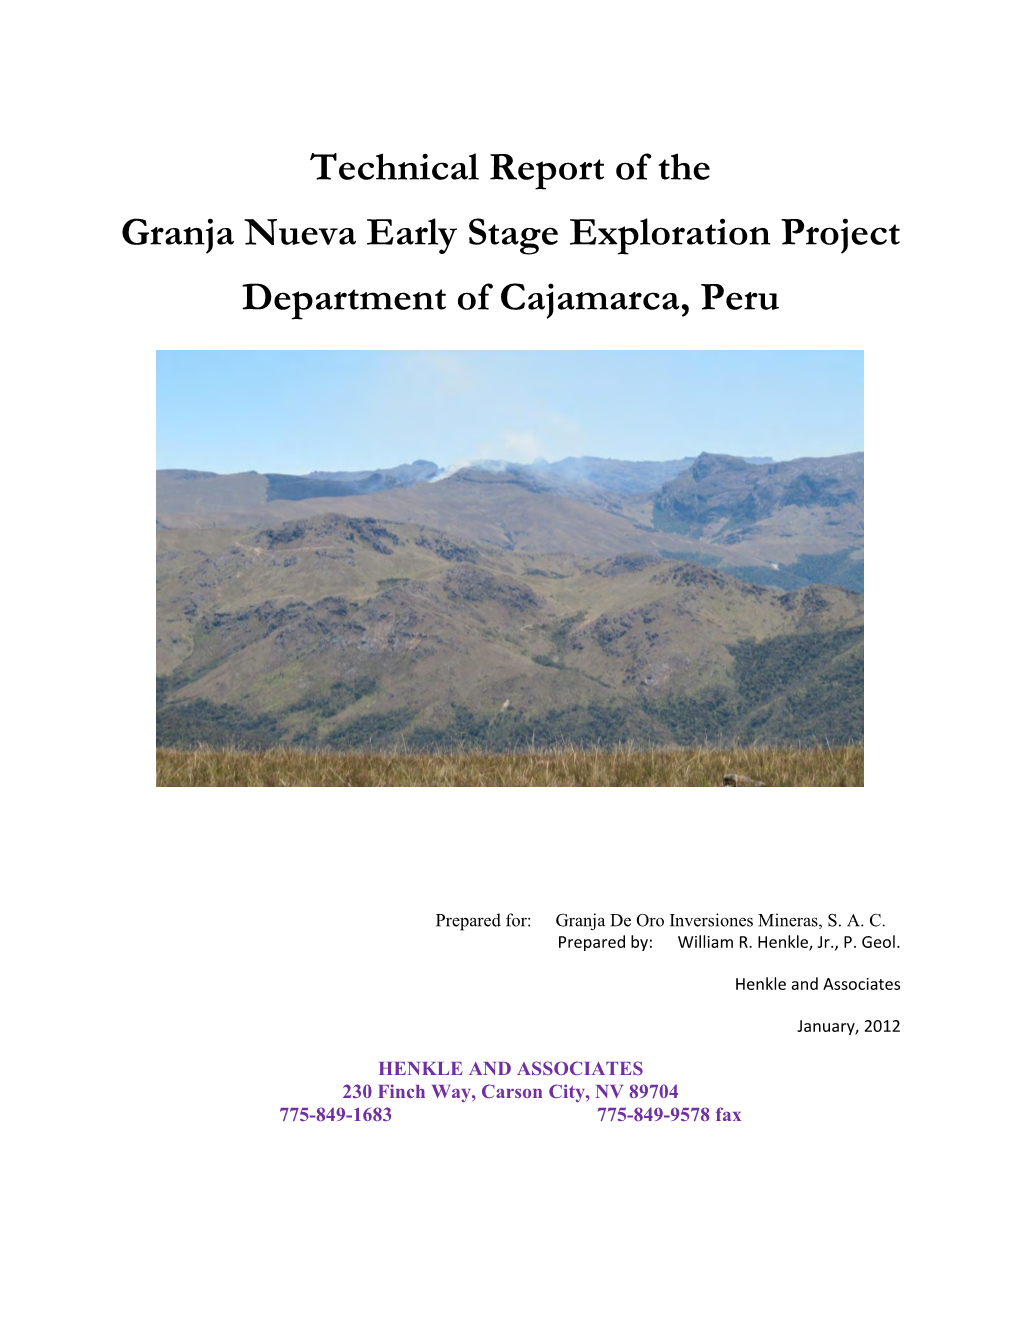 Technical Report of the Granja Nueva Early Stage Exploration Project Department of Cajamarca, Peru